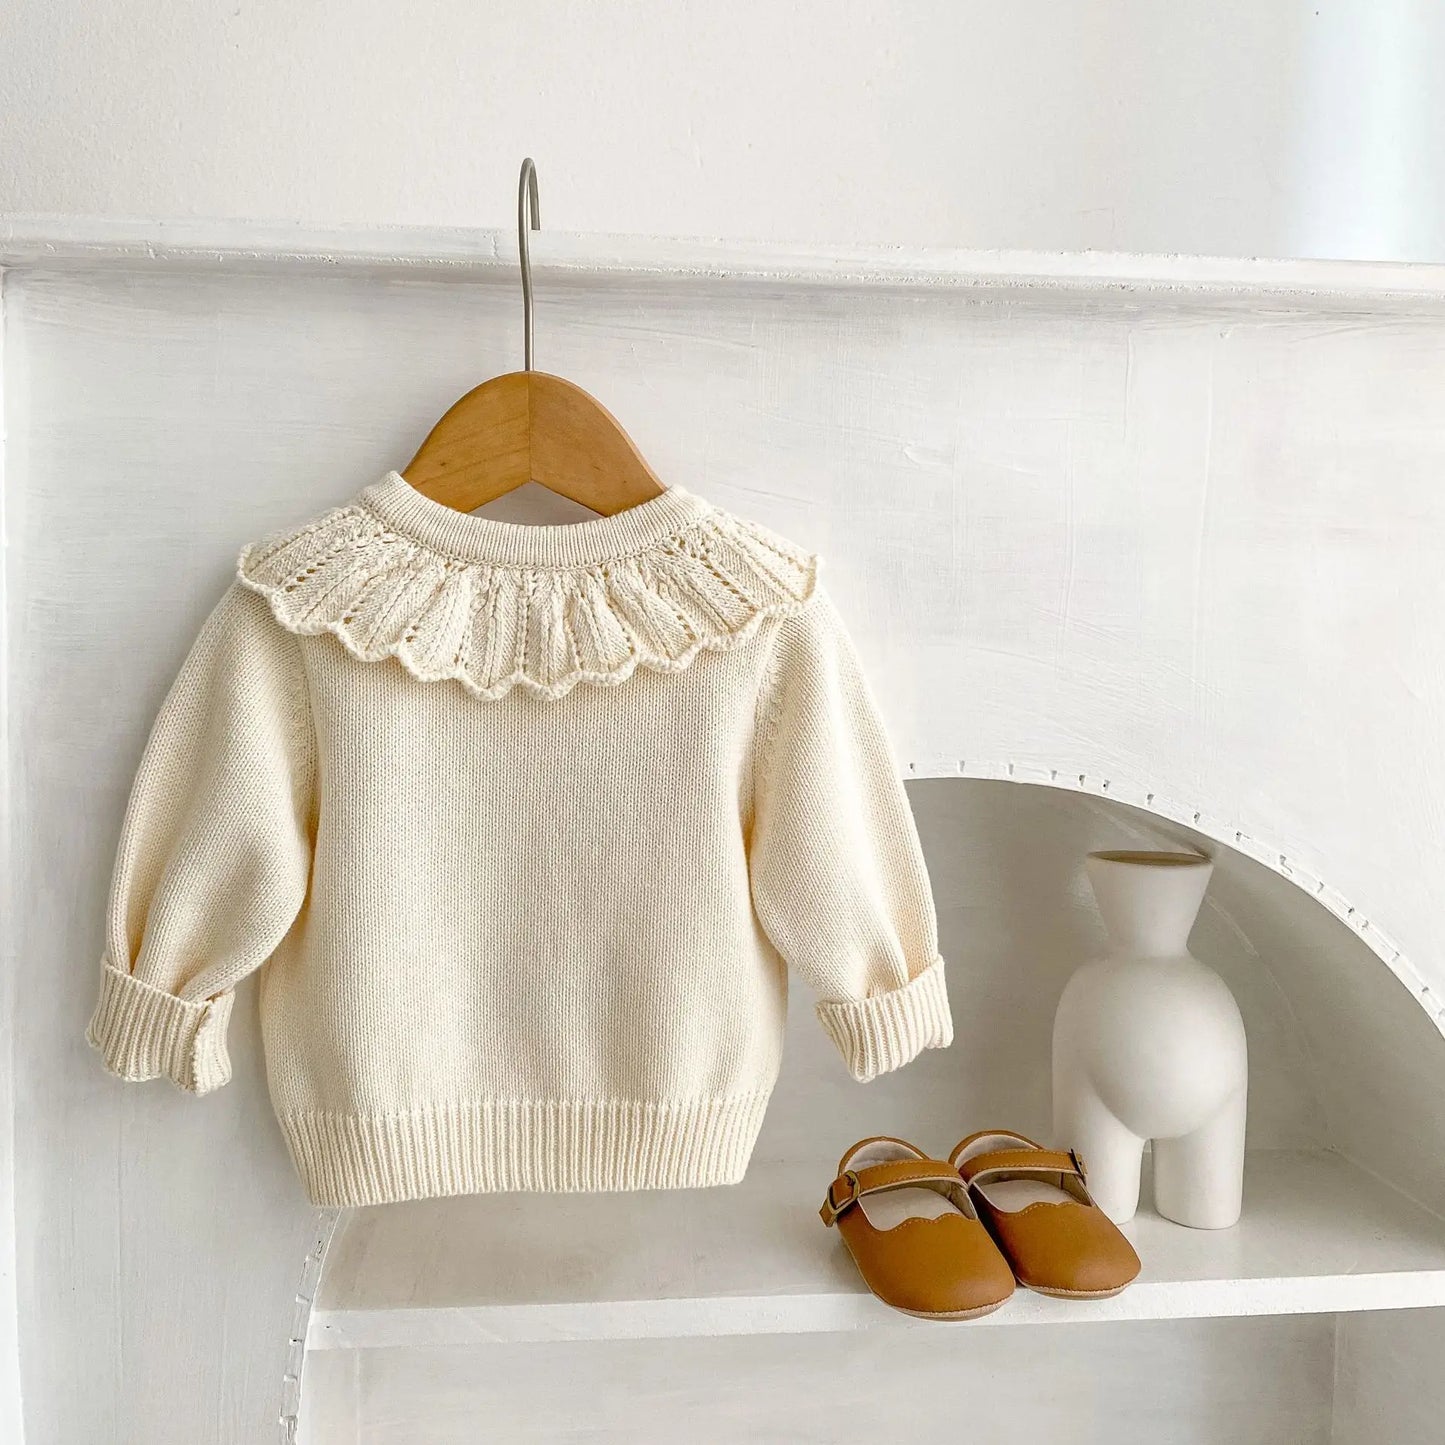 Baby knitwear embroidered flower coat girl baby sweater 100% cotton lace round neck spring baby cardigan